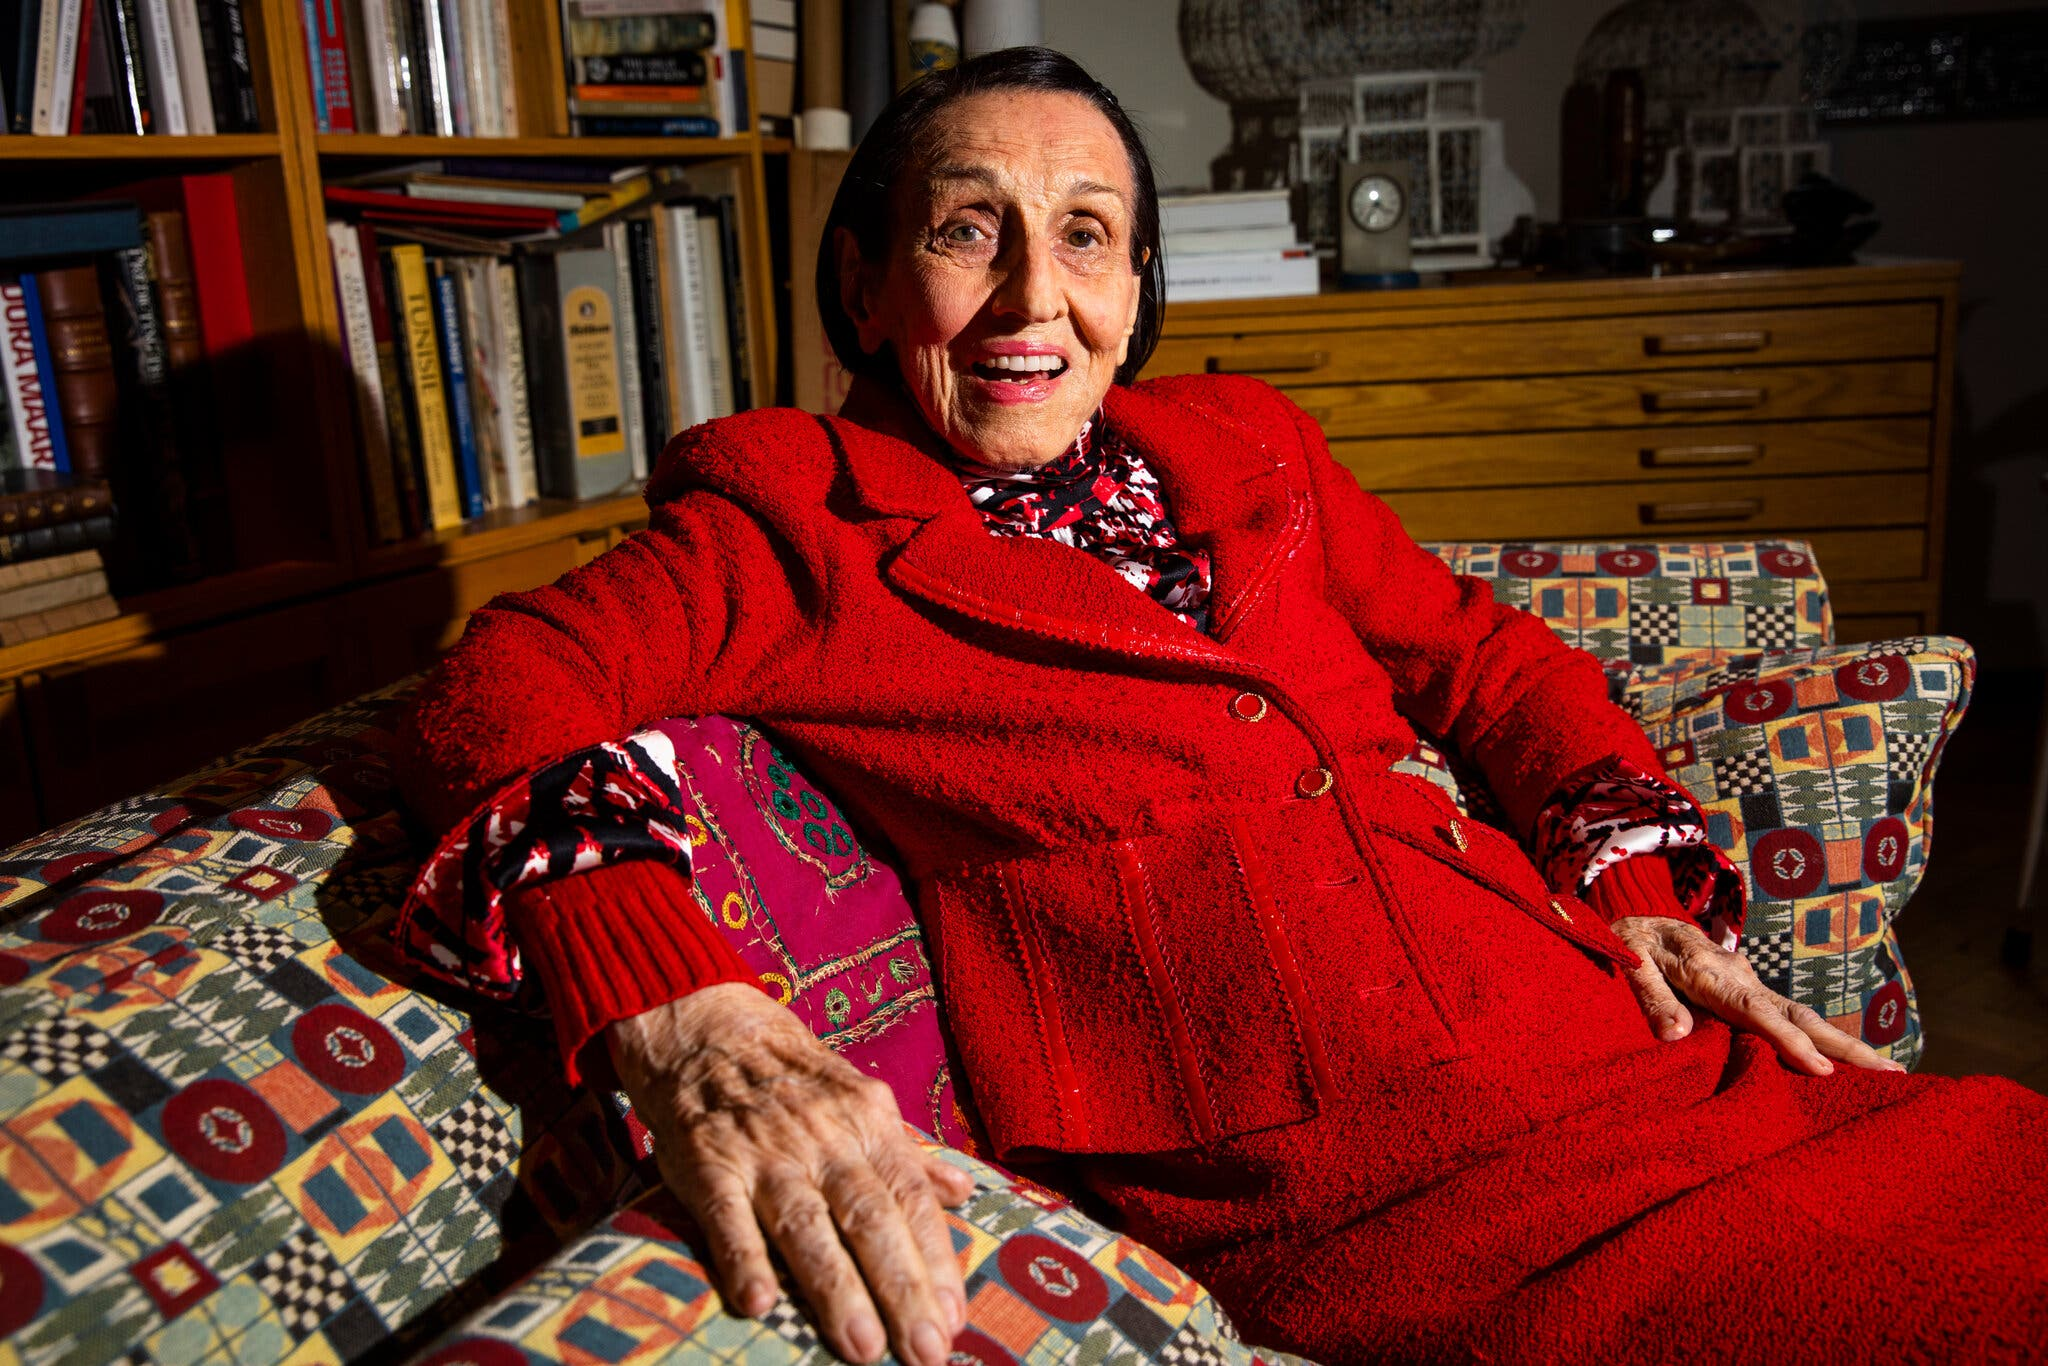 An older, light-skinned woman sits comfortably on a couch covered in geometric print. She wears a bright red skirt and jacket set, and a silk shirt under it with a red, white, and black abstract pattern. Her hair is black, straight, and falls to her earlobes. It is clipped back neatly. She stares at the camera with an enthusiastic look on her face, maybe mid-sentence or mid-smile. Behind her are full bookshelves and a dresser with a clock, and more books.